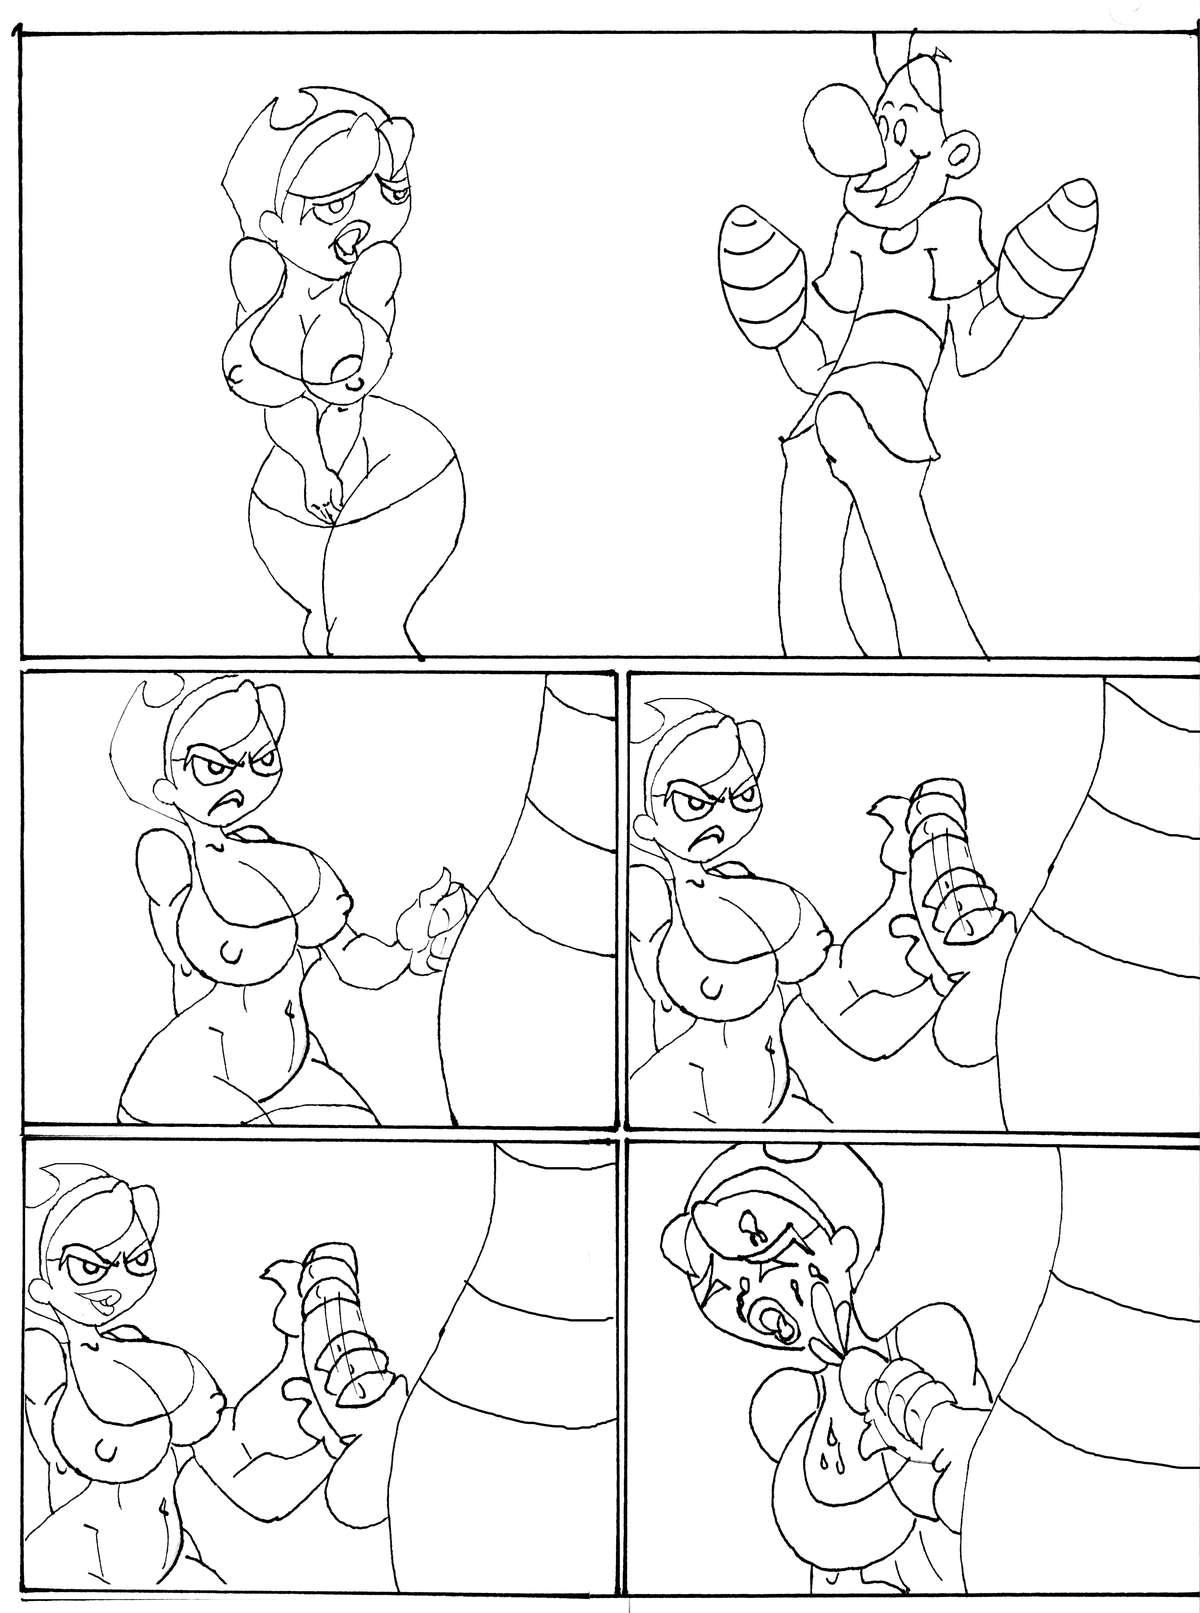 Interacial billy y mandy - The grim adventures of billy and mandy Phat - Page 5